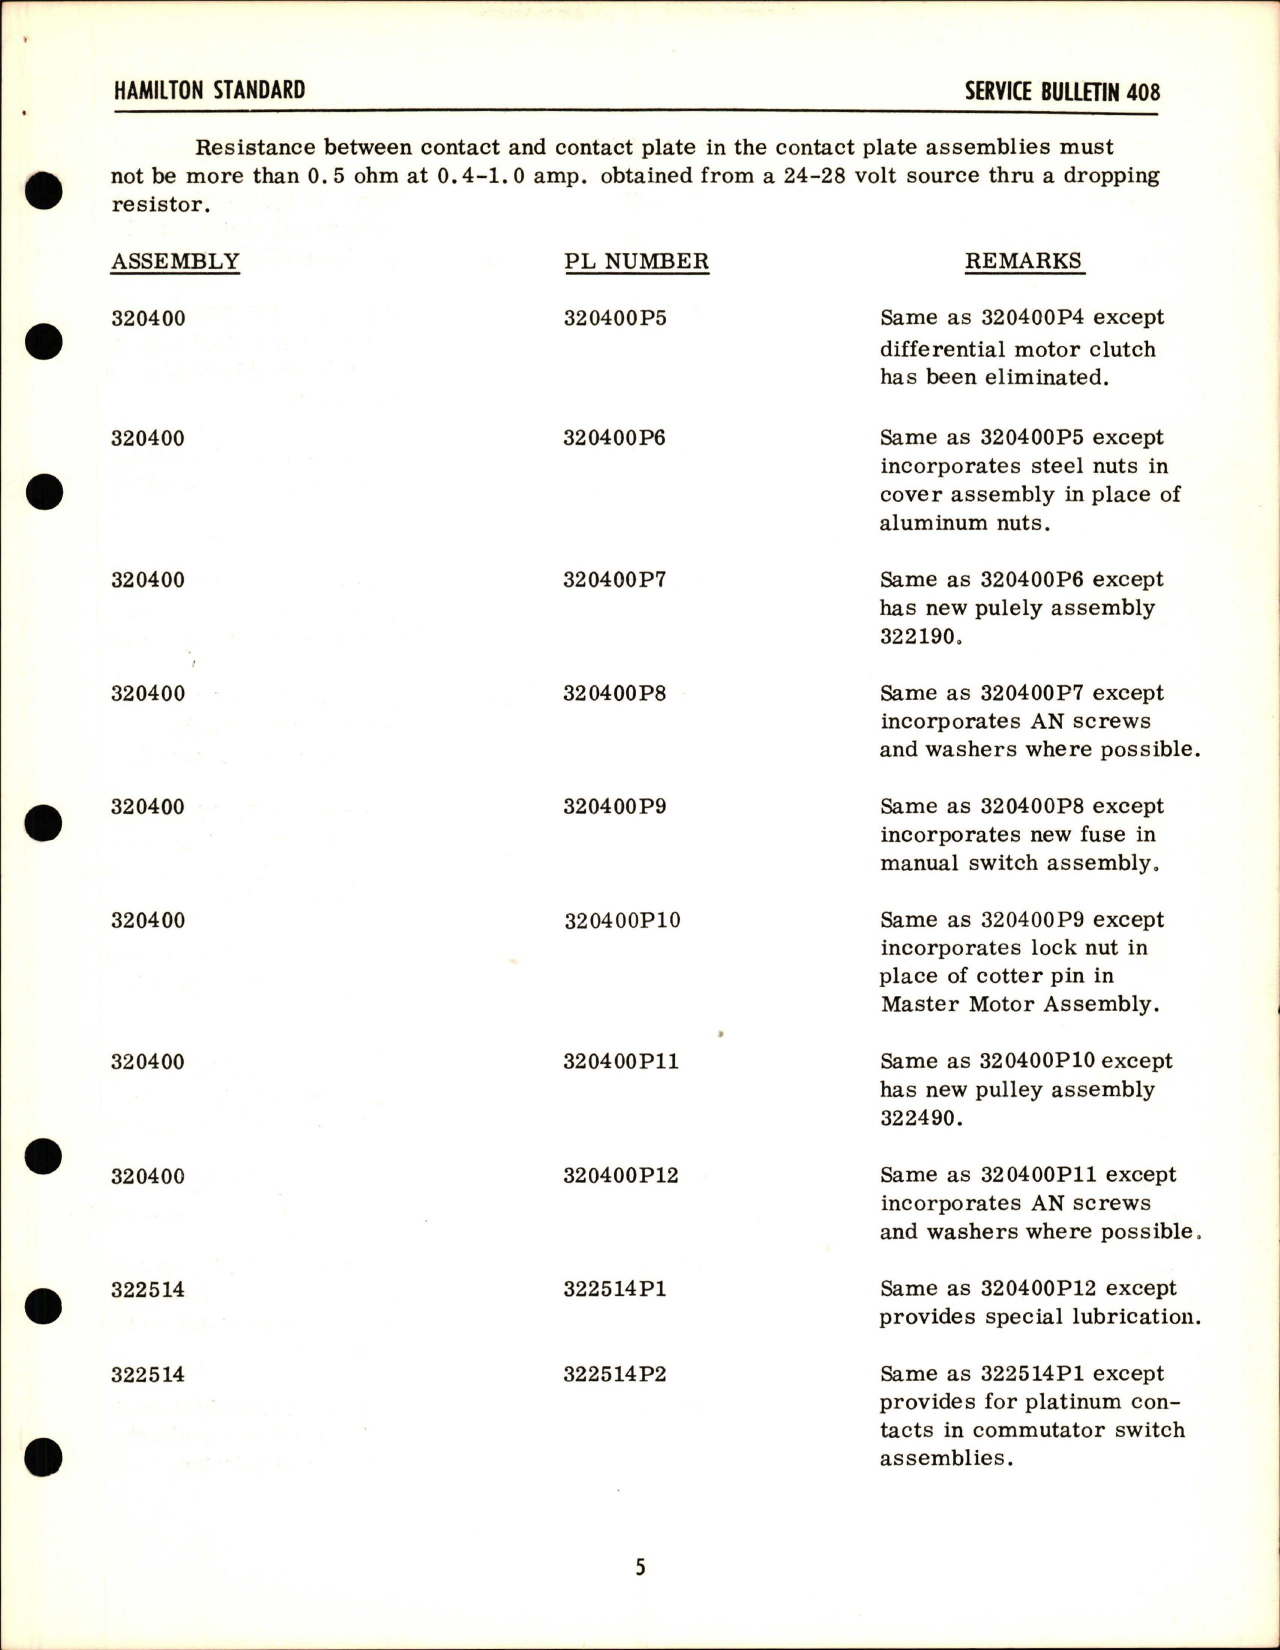 Sample page 5 from AirCorps Library document: Synchronizer Modifications